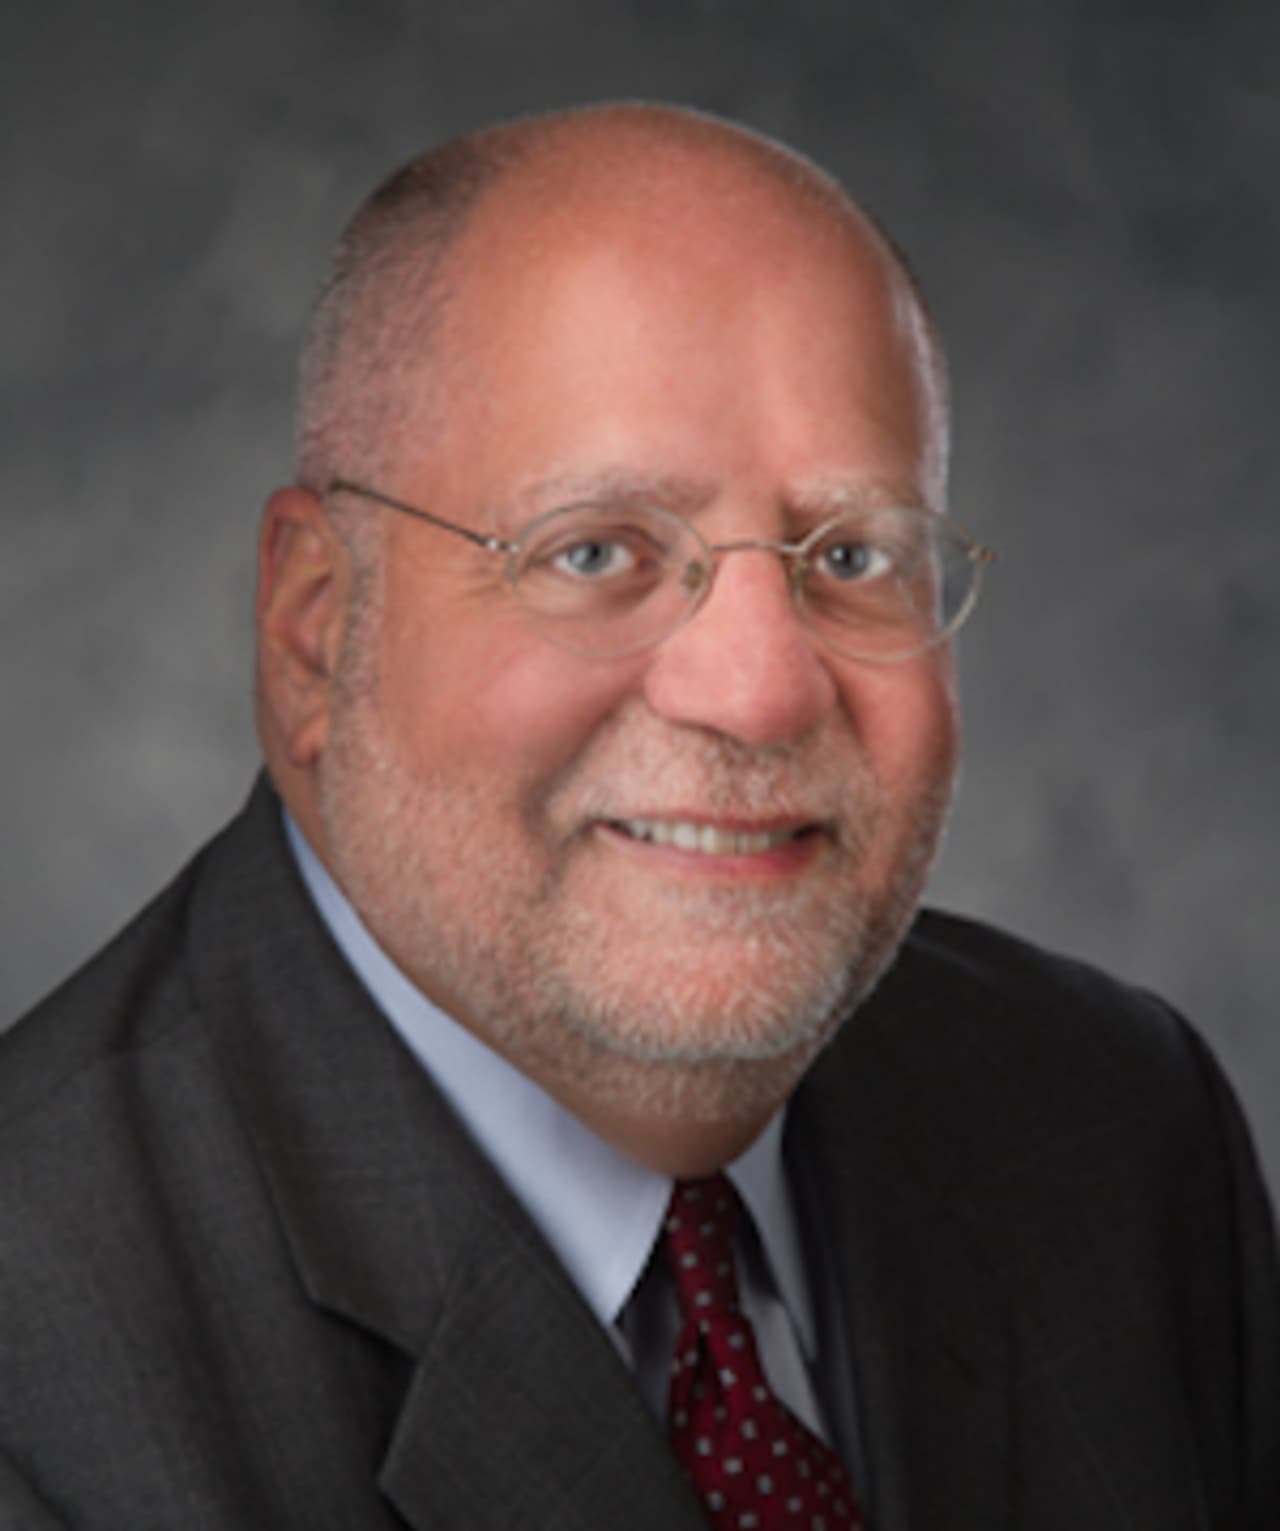 Charles J. Abate is Assistant Director of Pulmonary Medicine, Mount Sinai Health System at CareMount Medical.